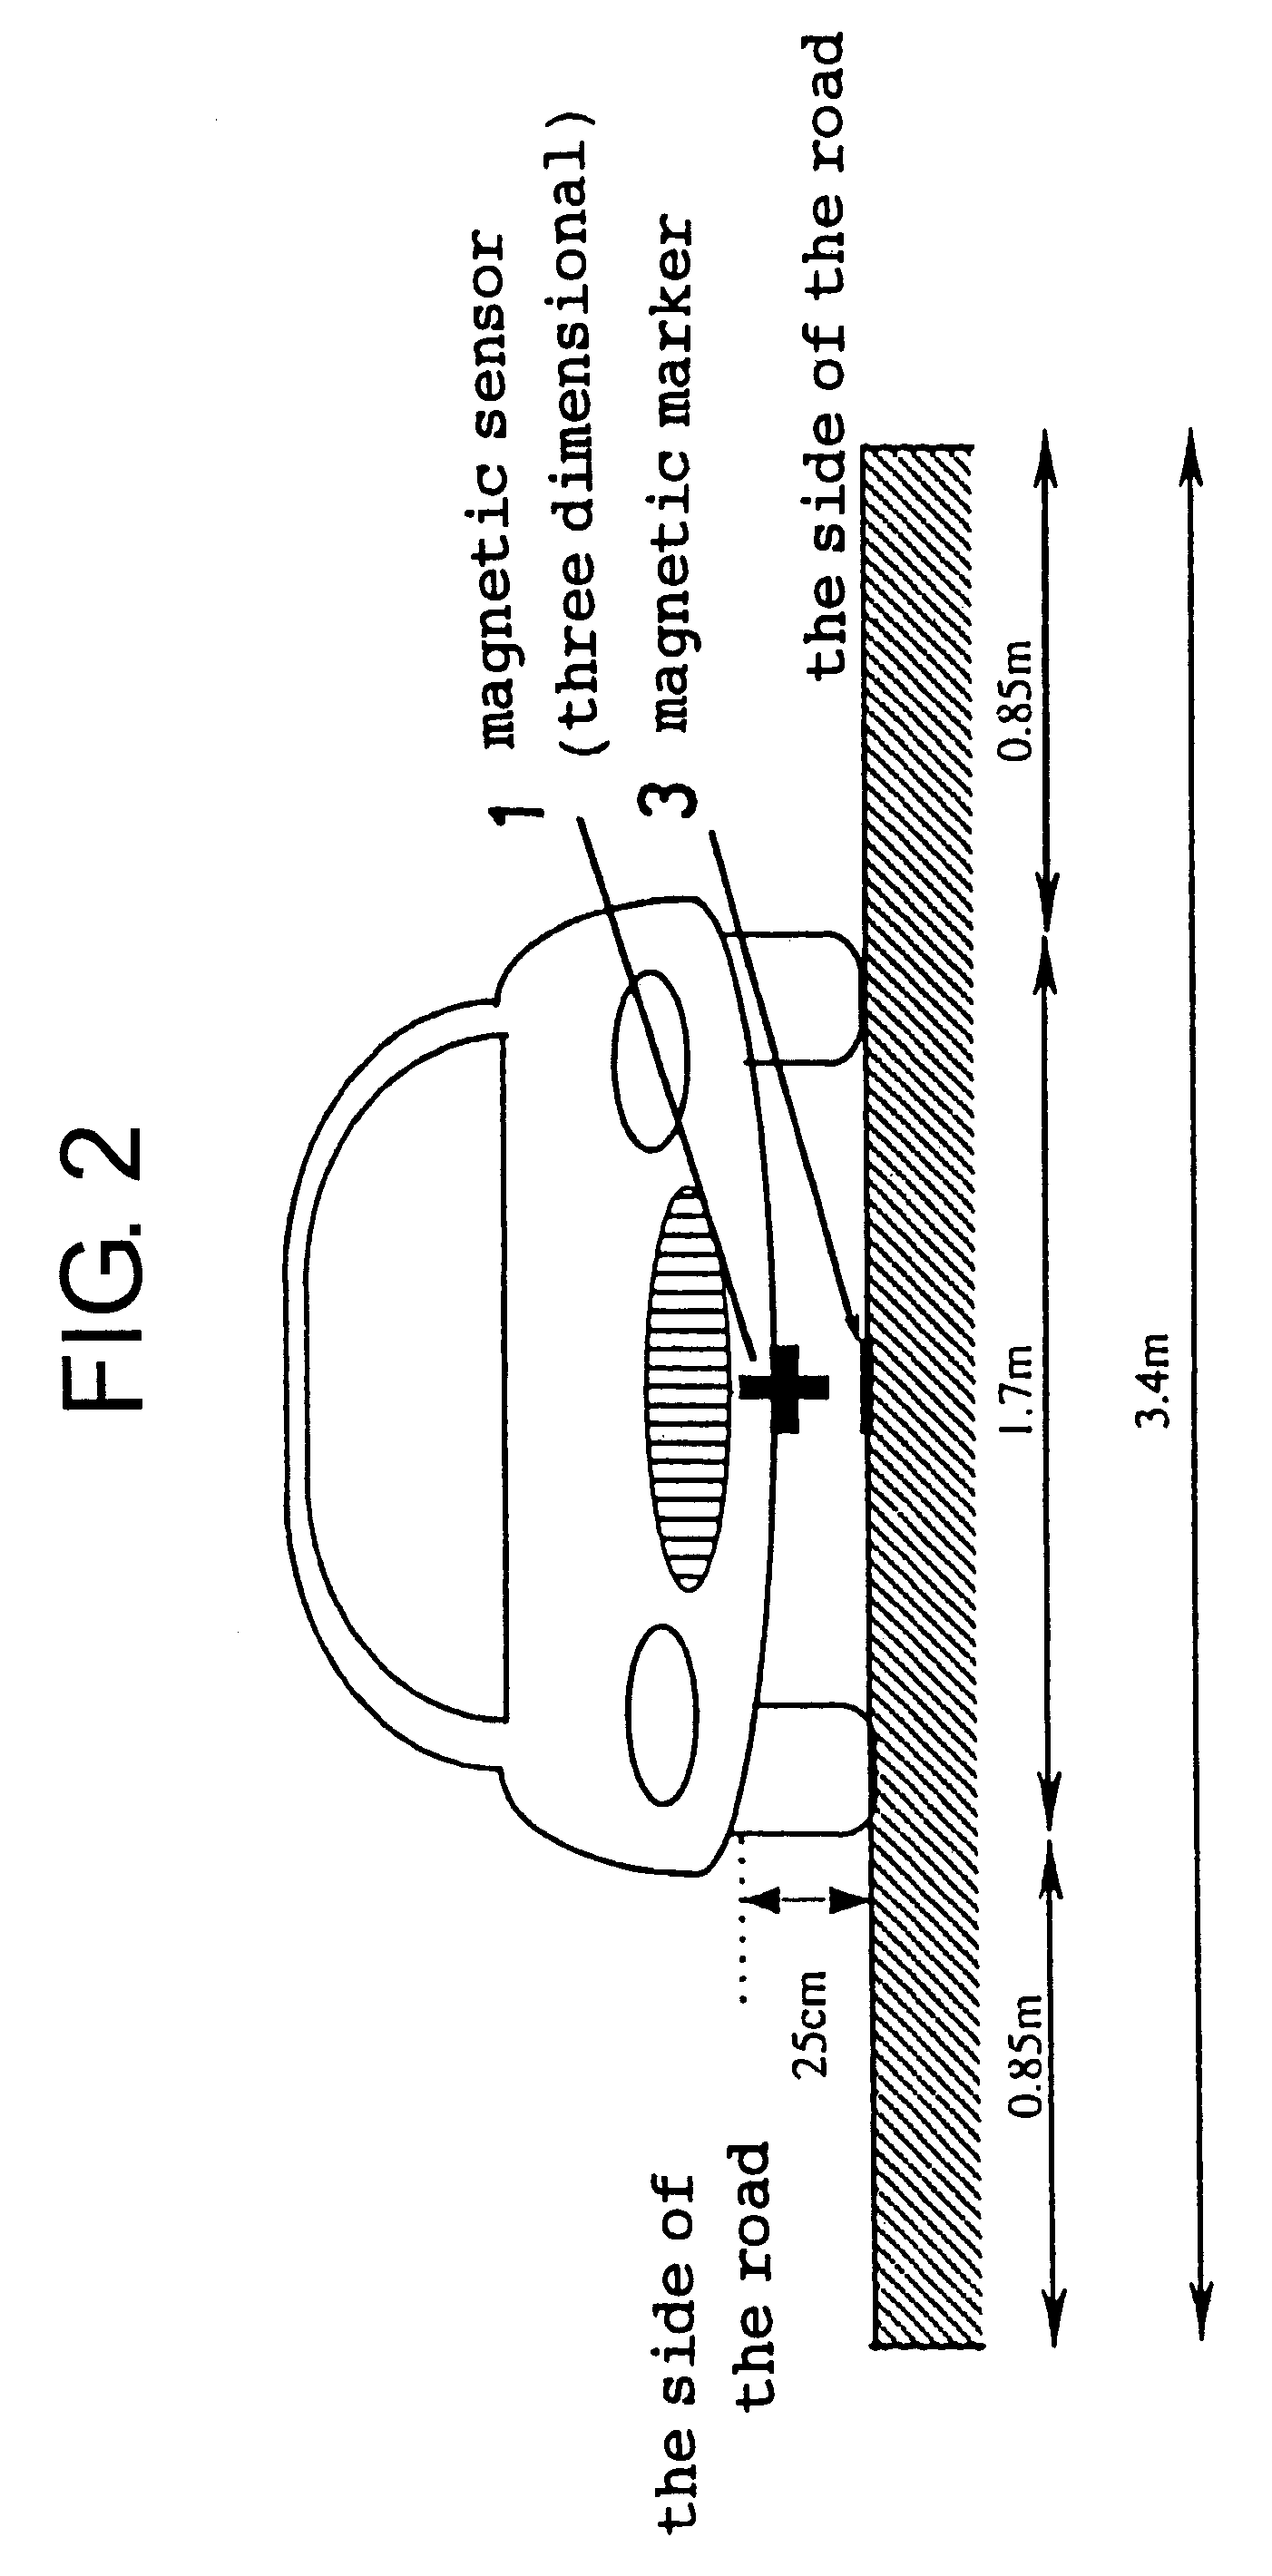 Magnetic apparatus for detecting position of vehicle